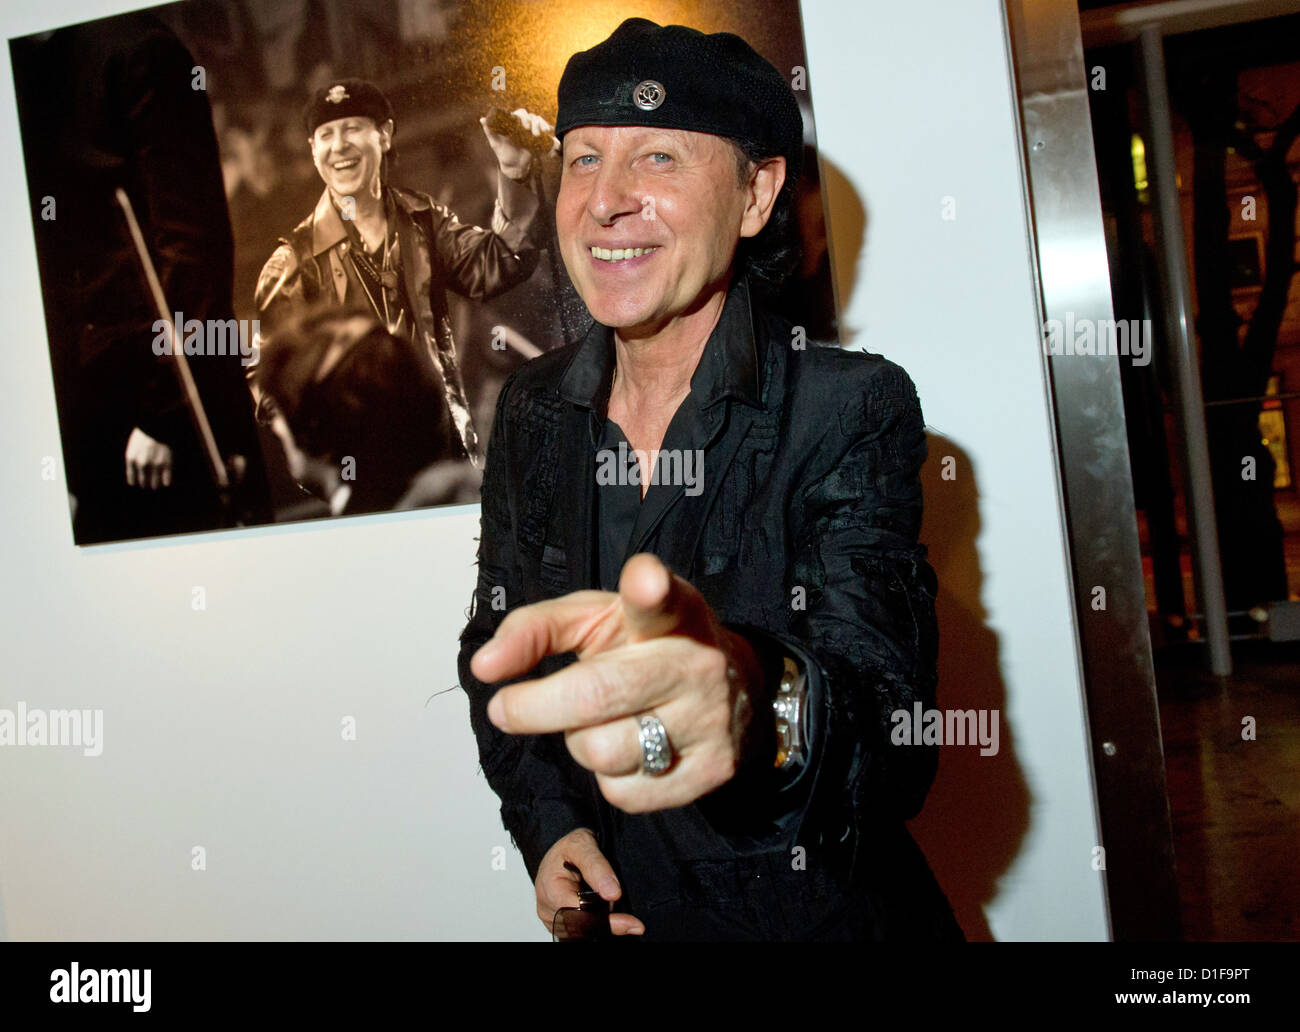 Klaus Meine, singer of rock band 'Scorpions,' stands before the opening of a photo exhibition of photographs of the band in Munich, Germany, 18 December 2012. Last night, the final concert of the 'Final Sting World Tour 2012' took place in Munich. Photo: PETER KNEFFEL Stock Photo